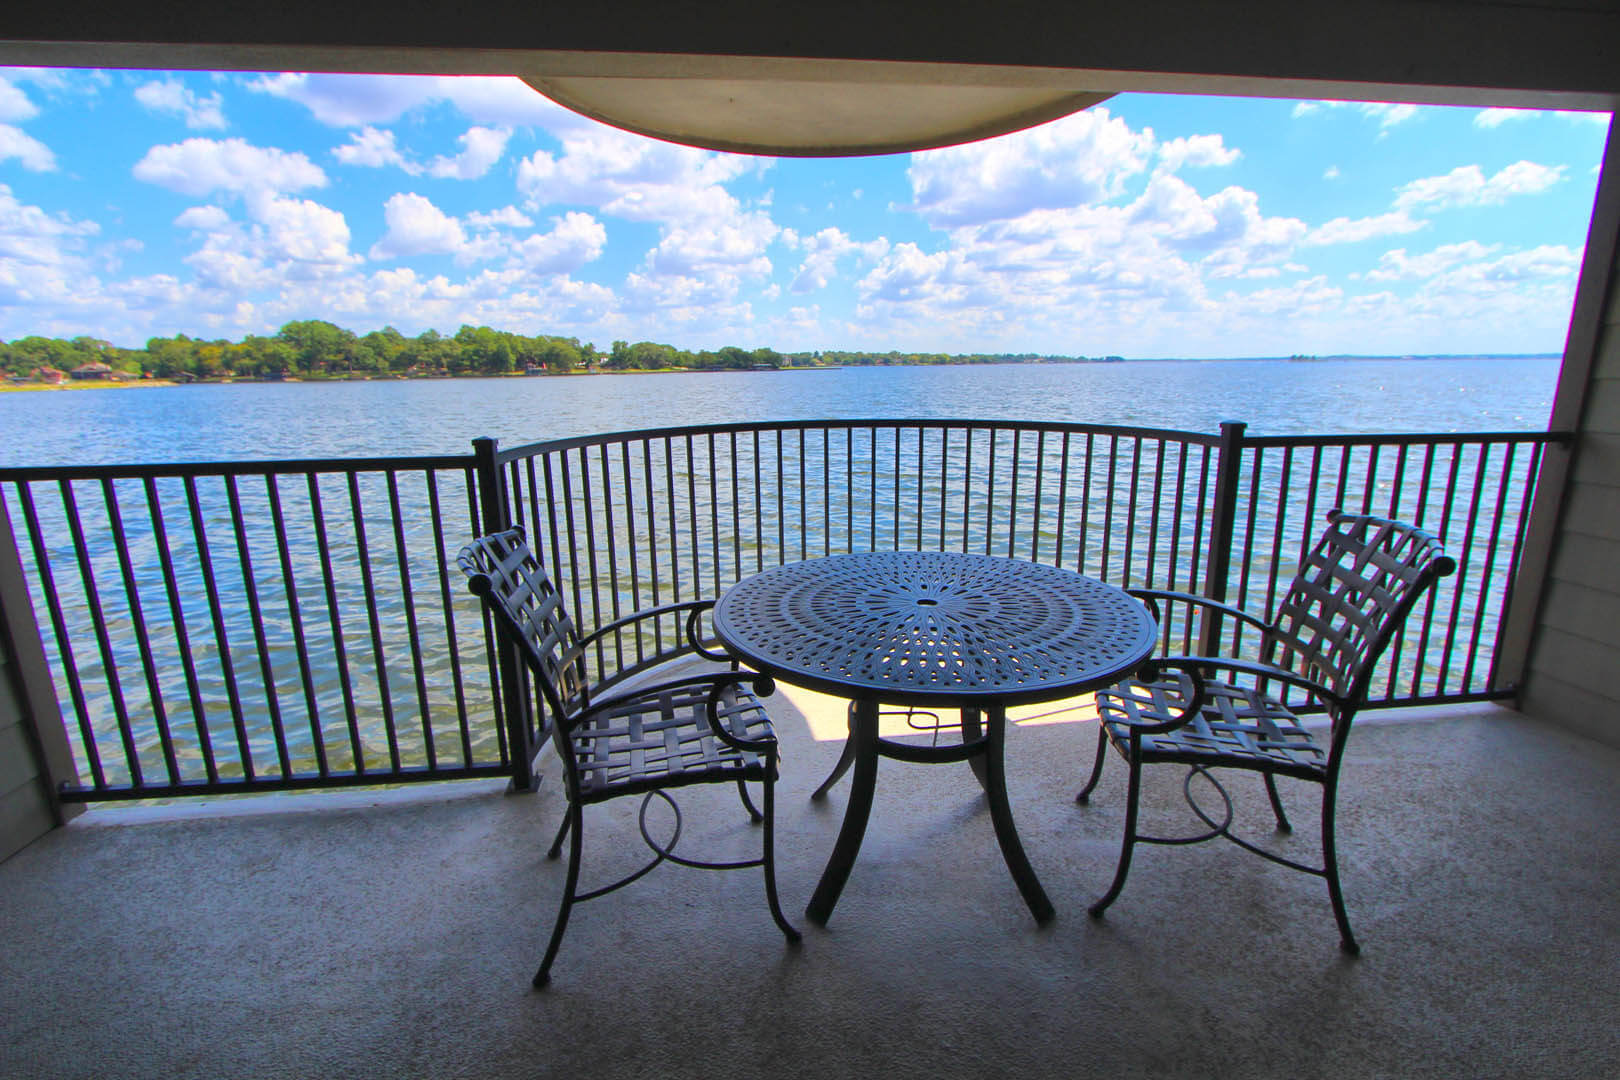 A peaceful balcony view to the lake at VRI's The Landing at Seven Coves in Willis, Texas.